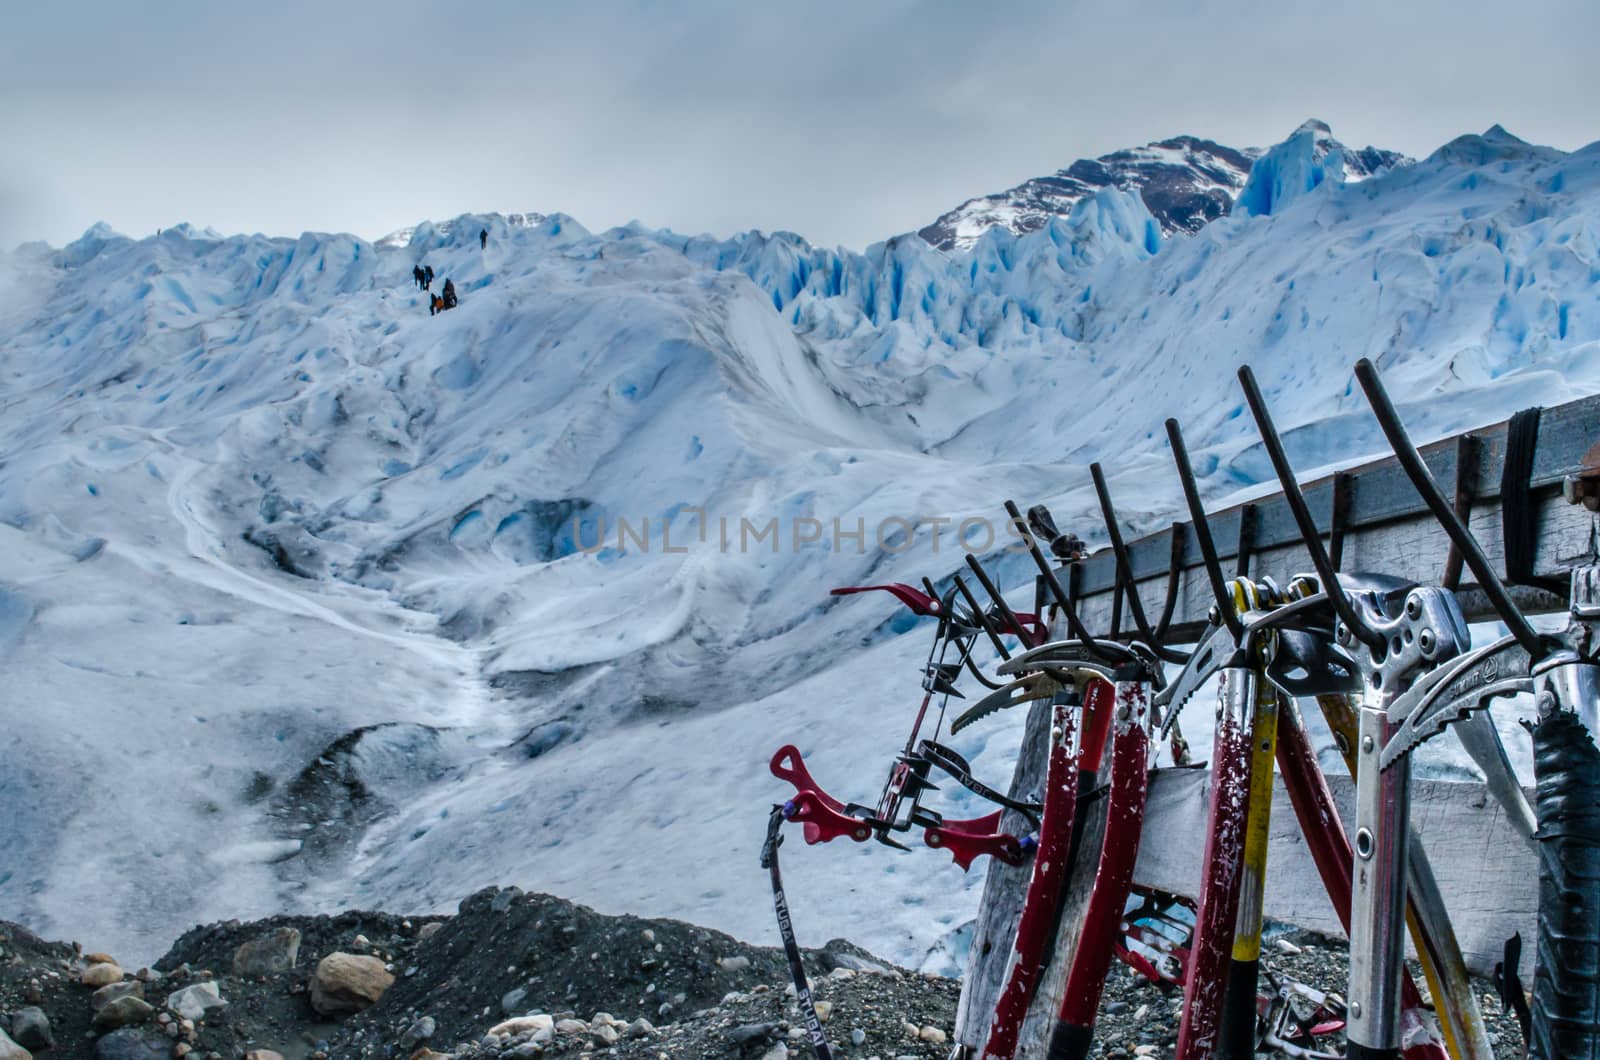 Some ice axes stand in front of the glacier waiting to be used by the tourists.